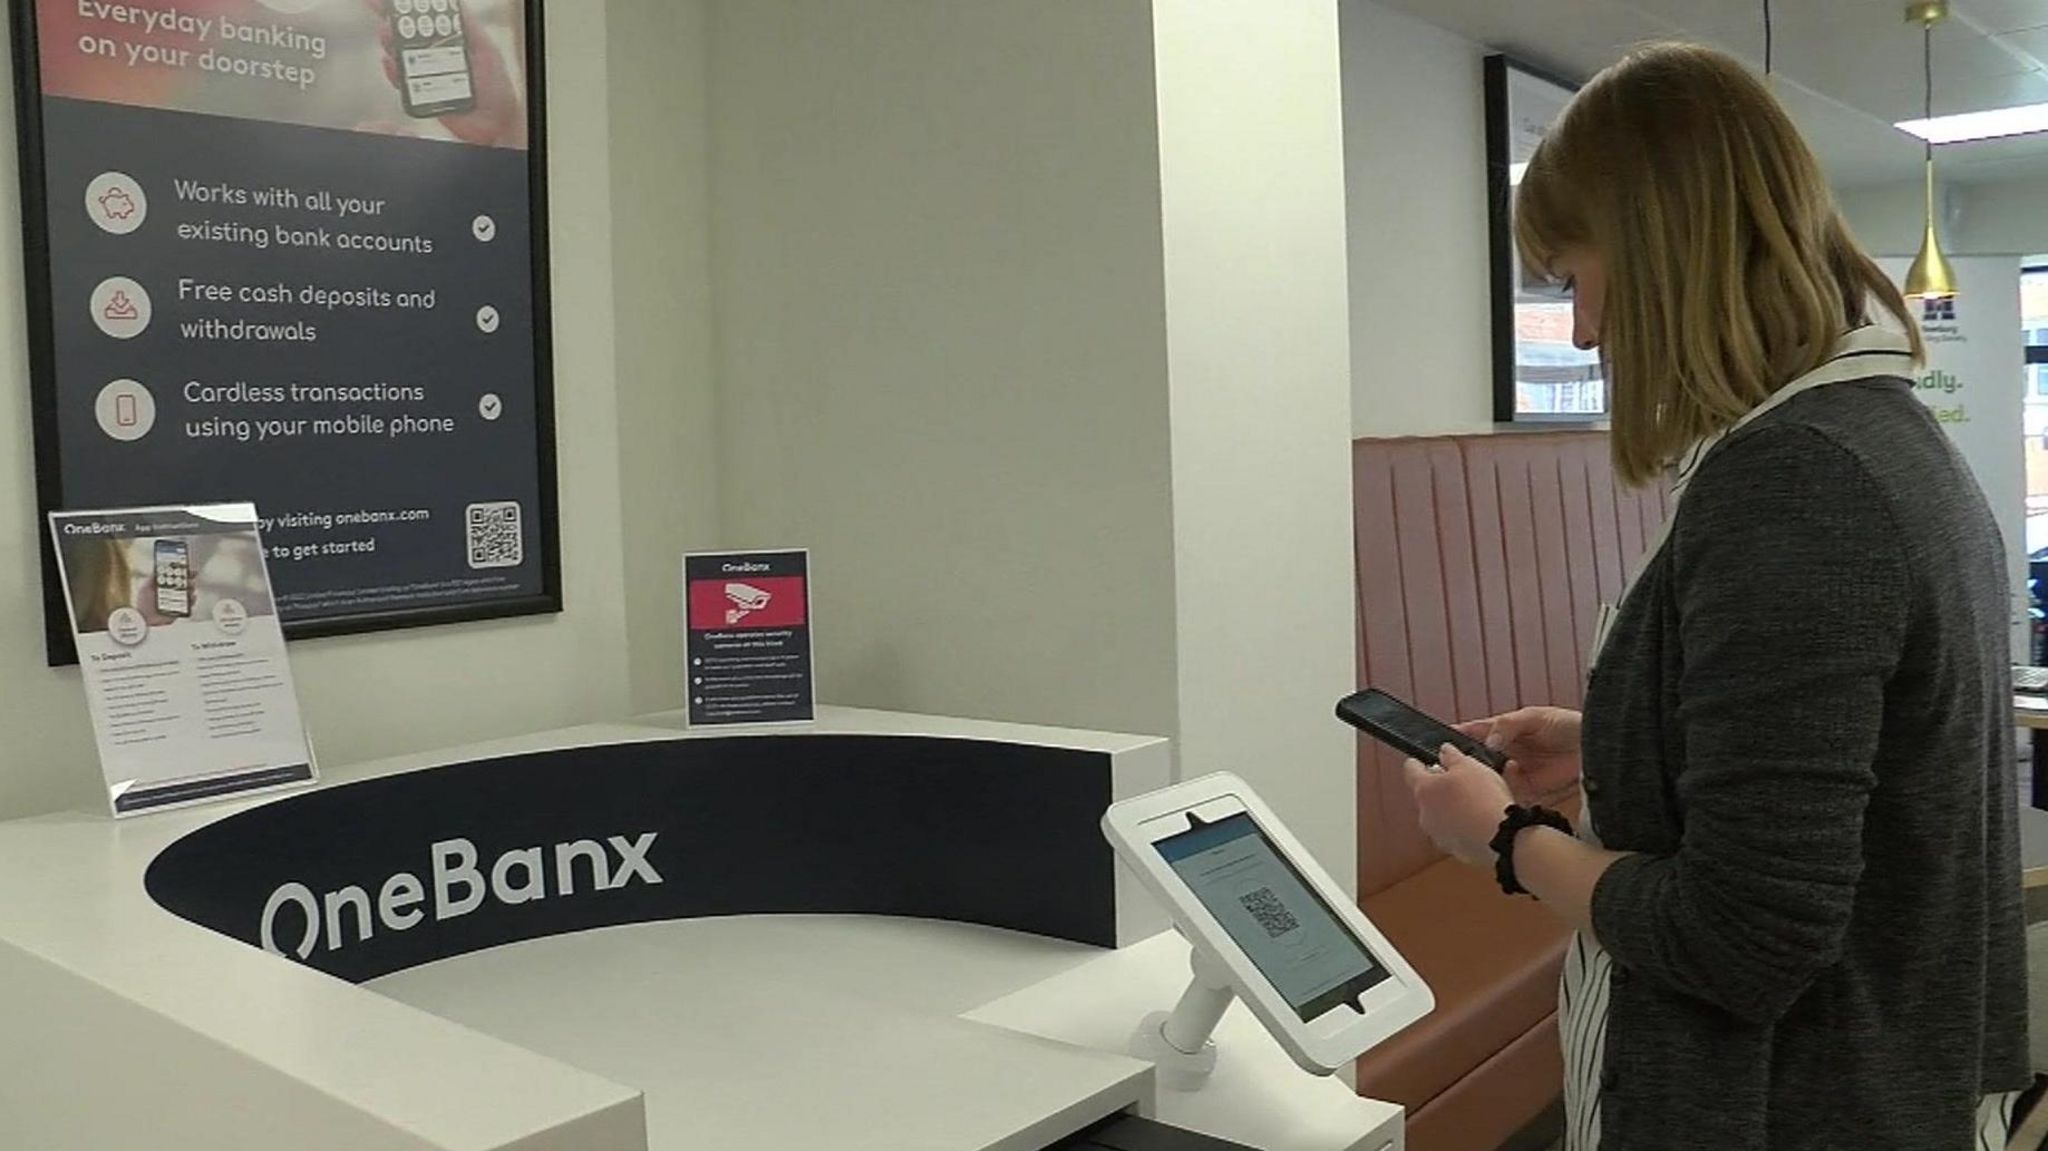 Female customer with phone stands by white banking hub desk